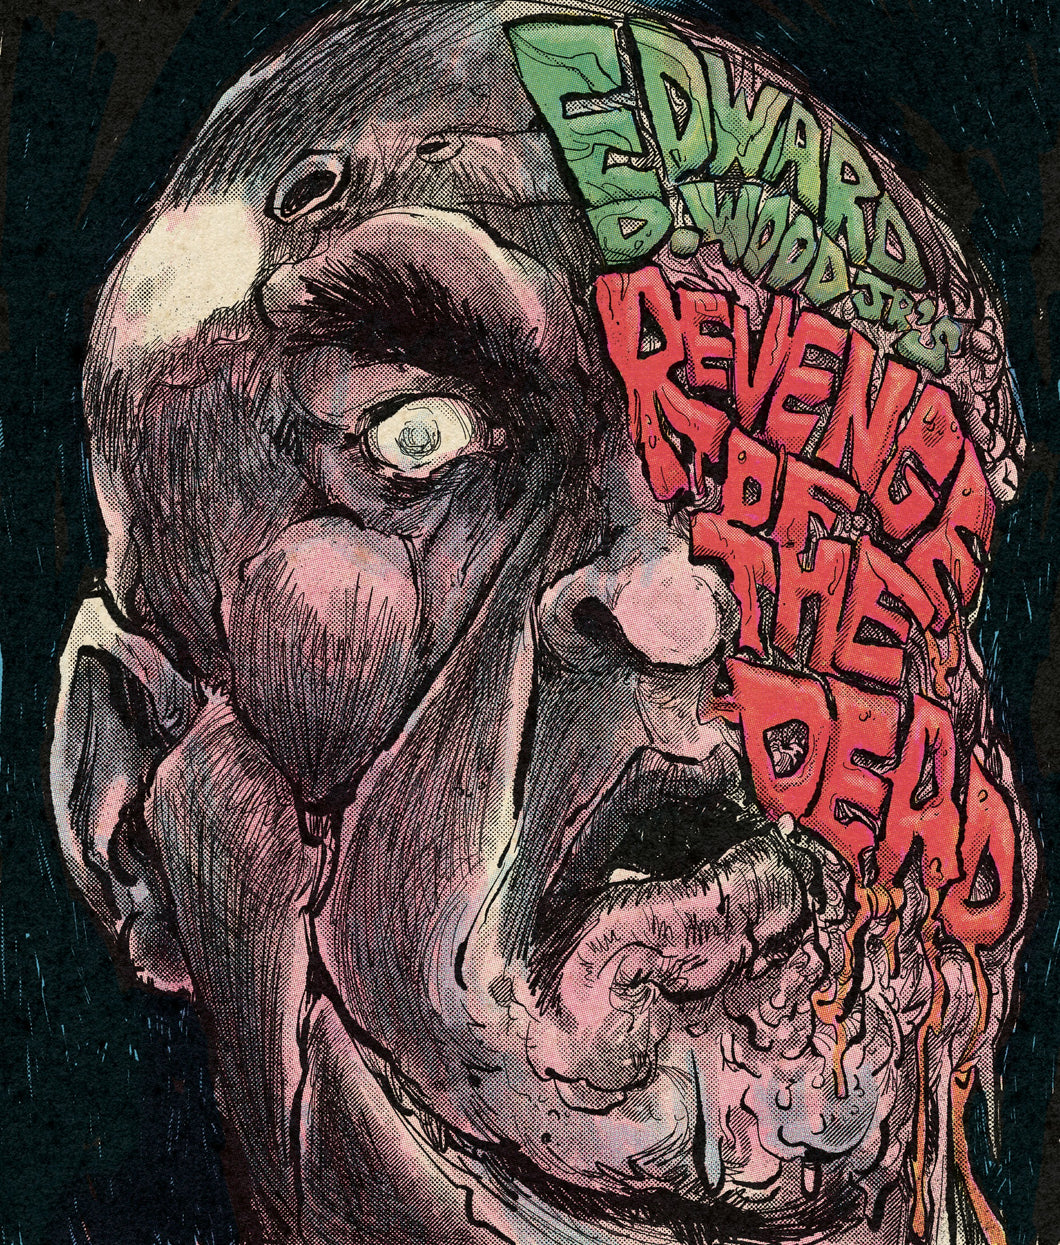 Blu-ray: Ed Wood's Revenge of the Dead (1959) (aka. NIGHT OF THE GHOULS)